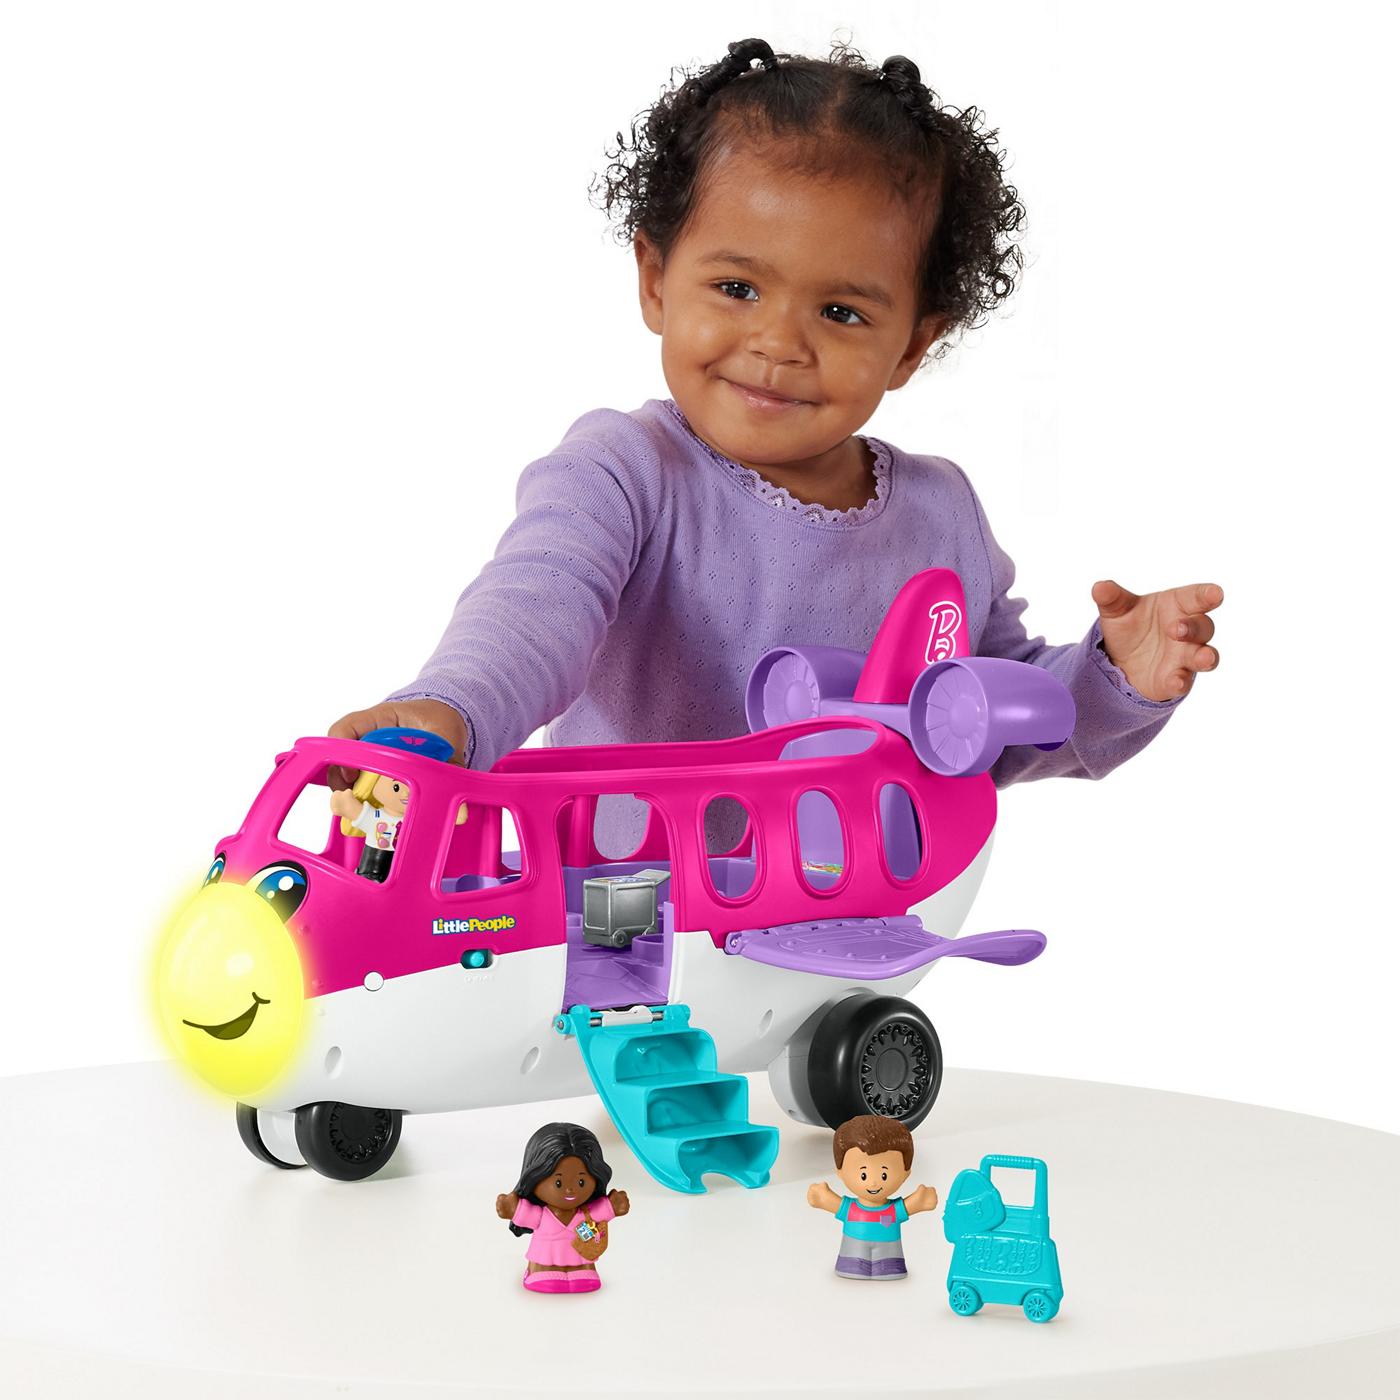 Fisher-Price Little People Barbie Toddler Toy Little Dream Plane with  Lights Music & Figures for Pretend Play Ages 18+ Months